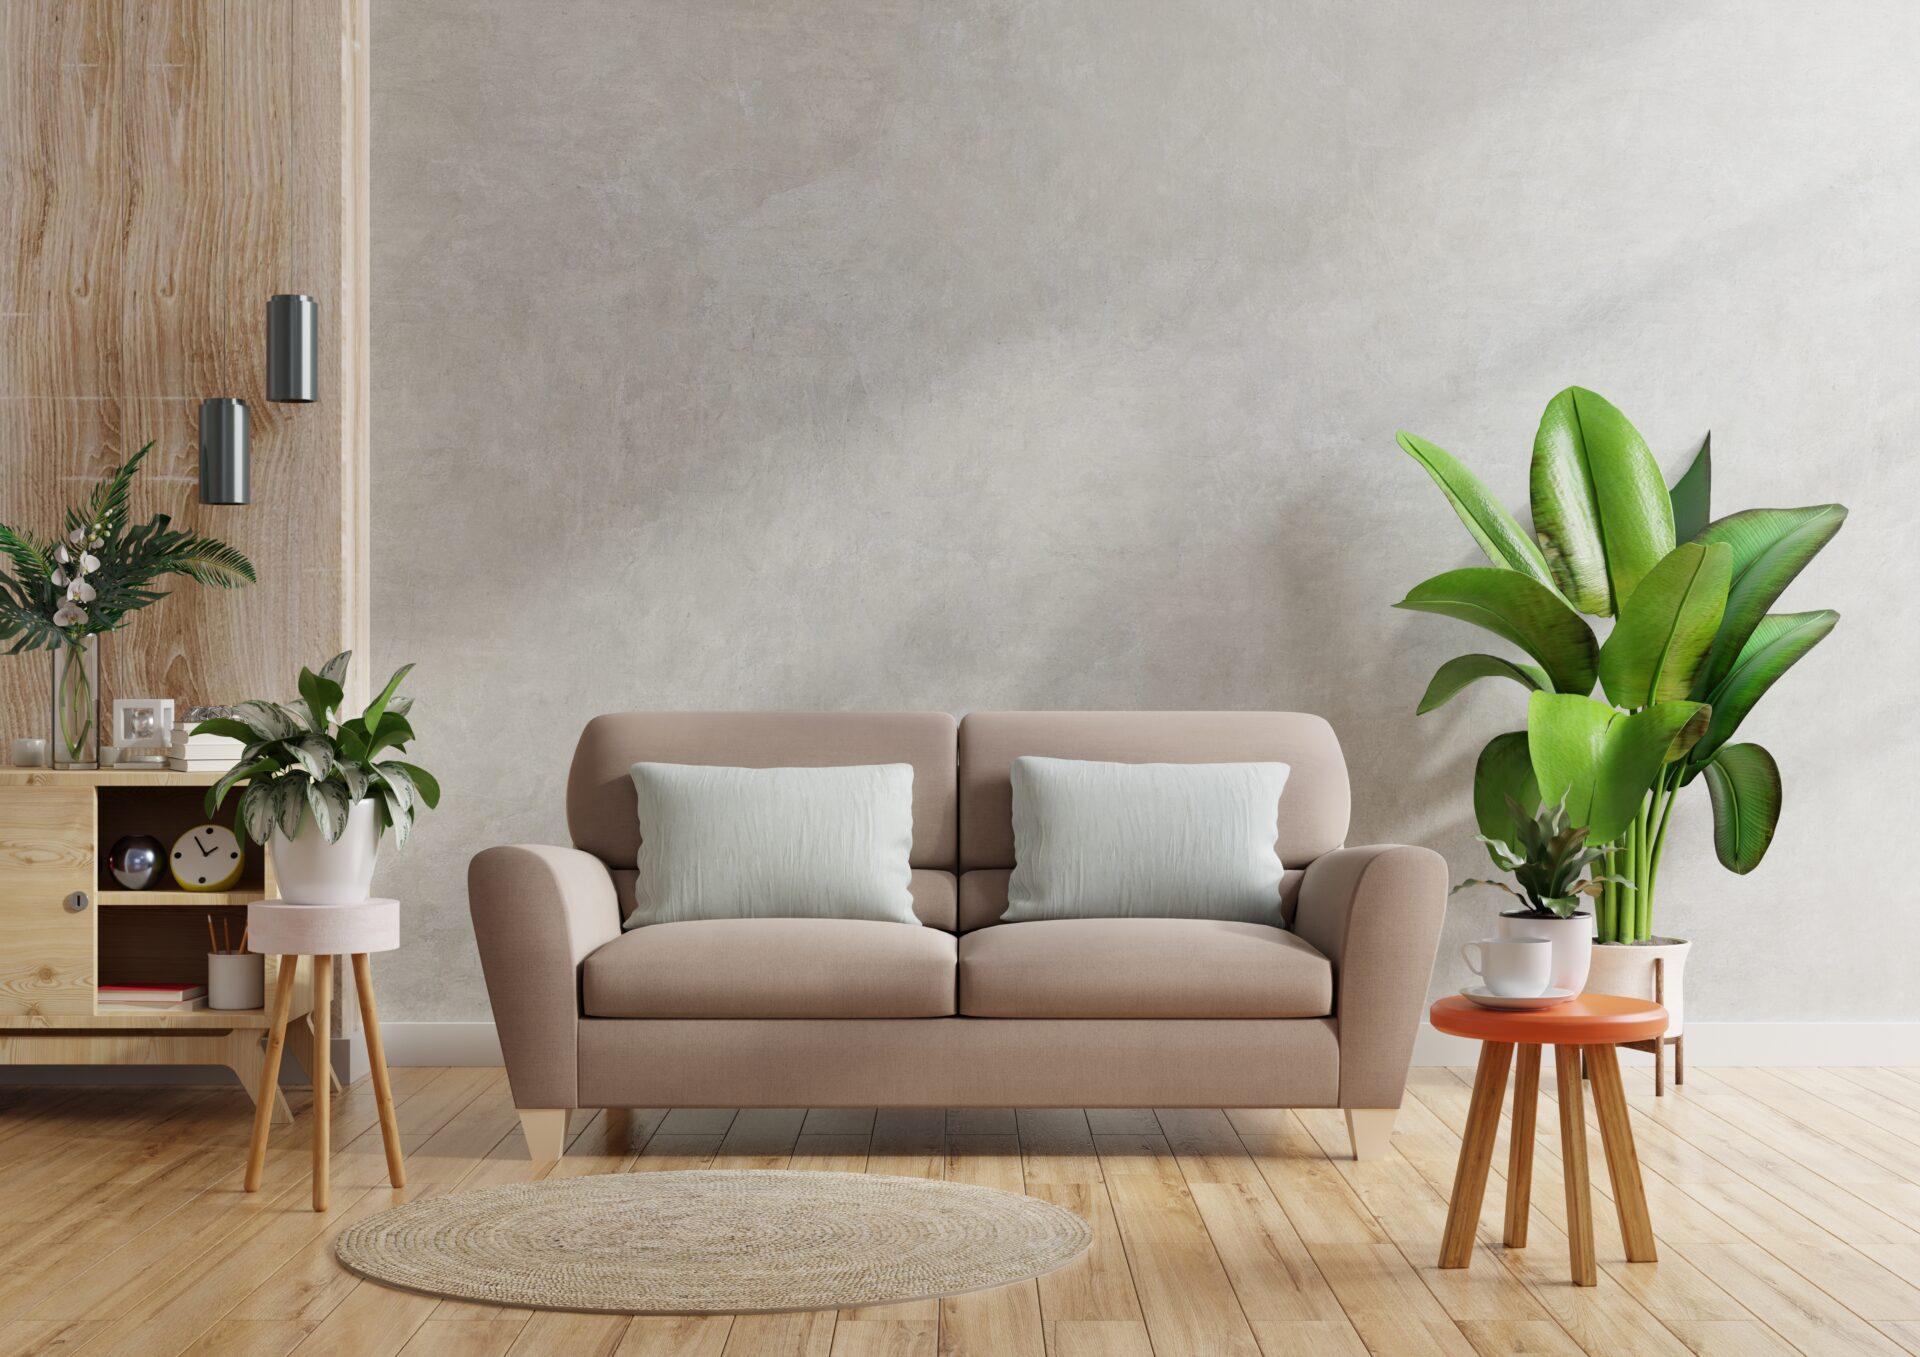 Brown sofa and a wooden table in living room interior with plant,concrete wall.3d rendering